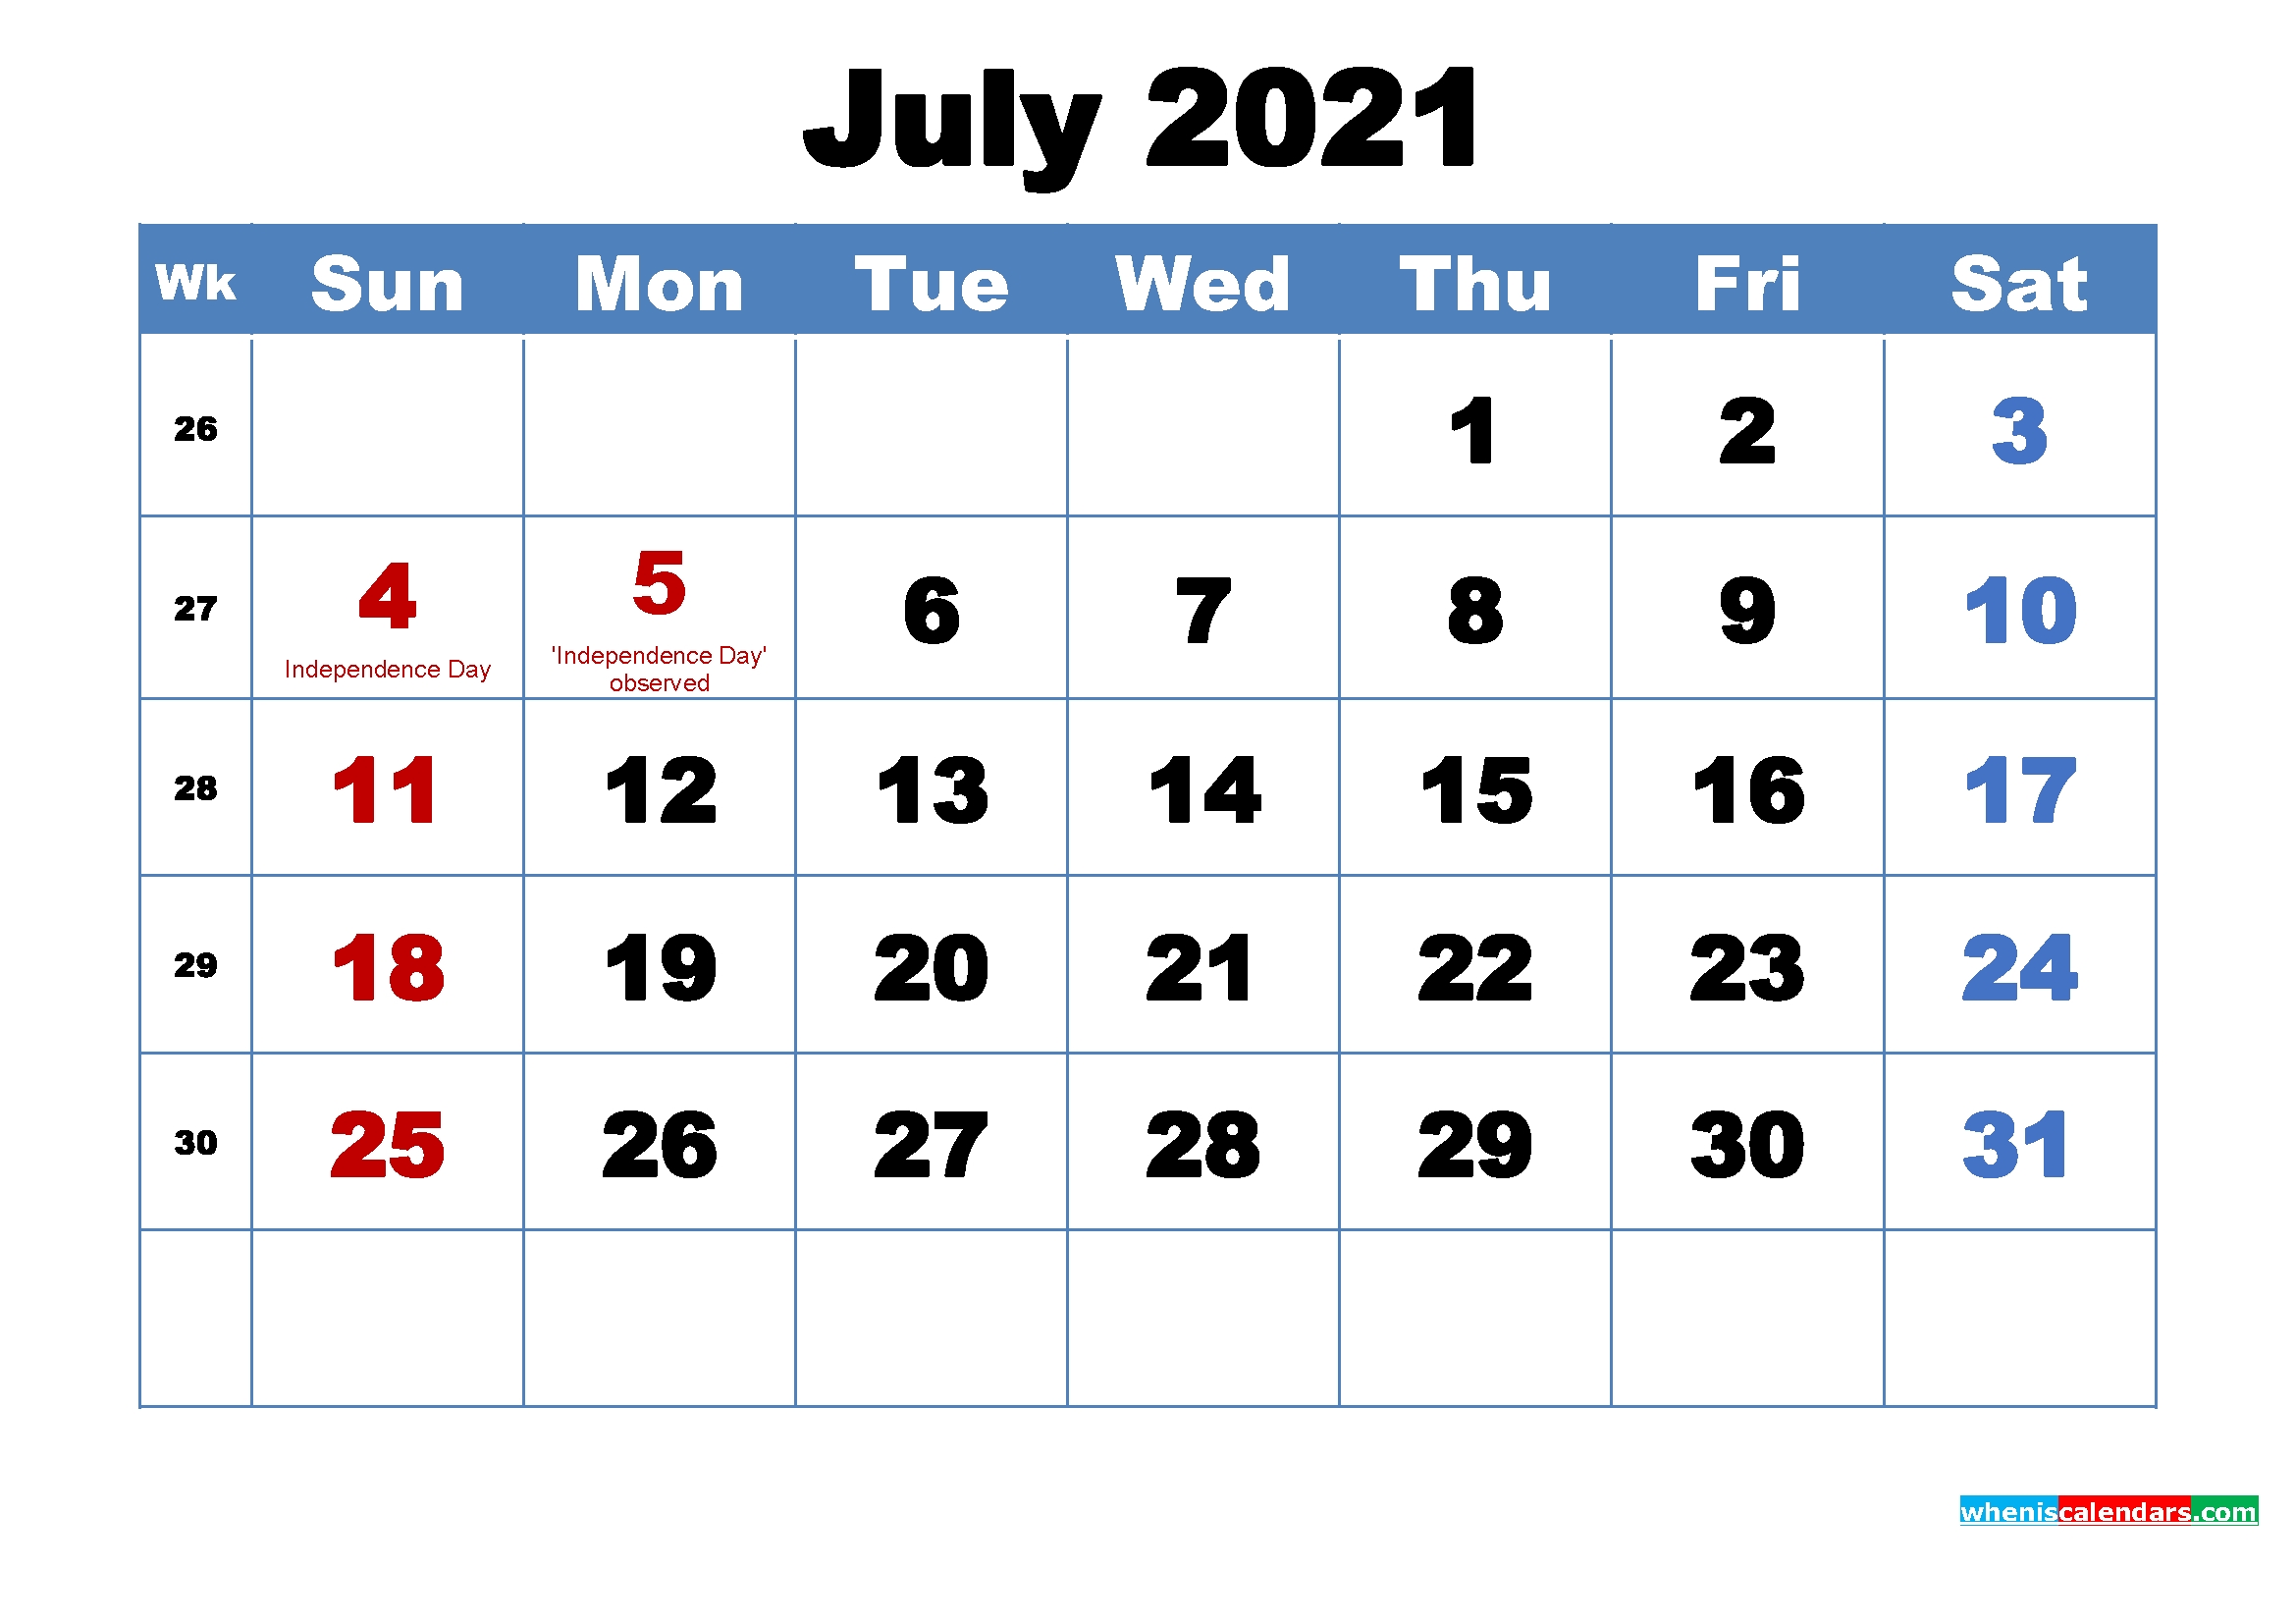 Free Printable July 2021 Calendar With Holidays - Free Printable 2021 Monthly Calendar With Holidays Picture Of July 2021 Calendar